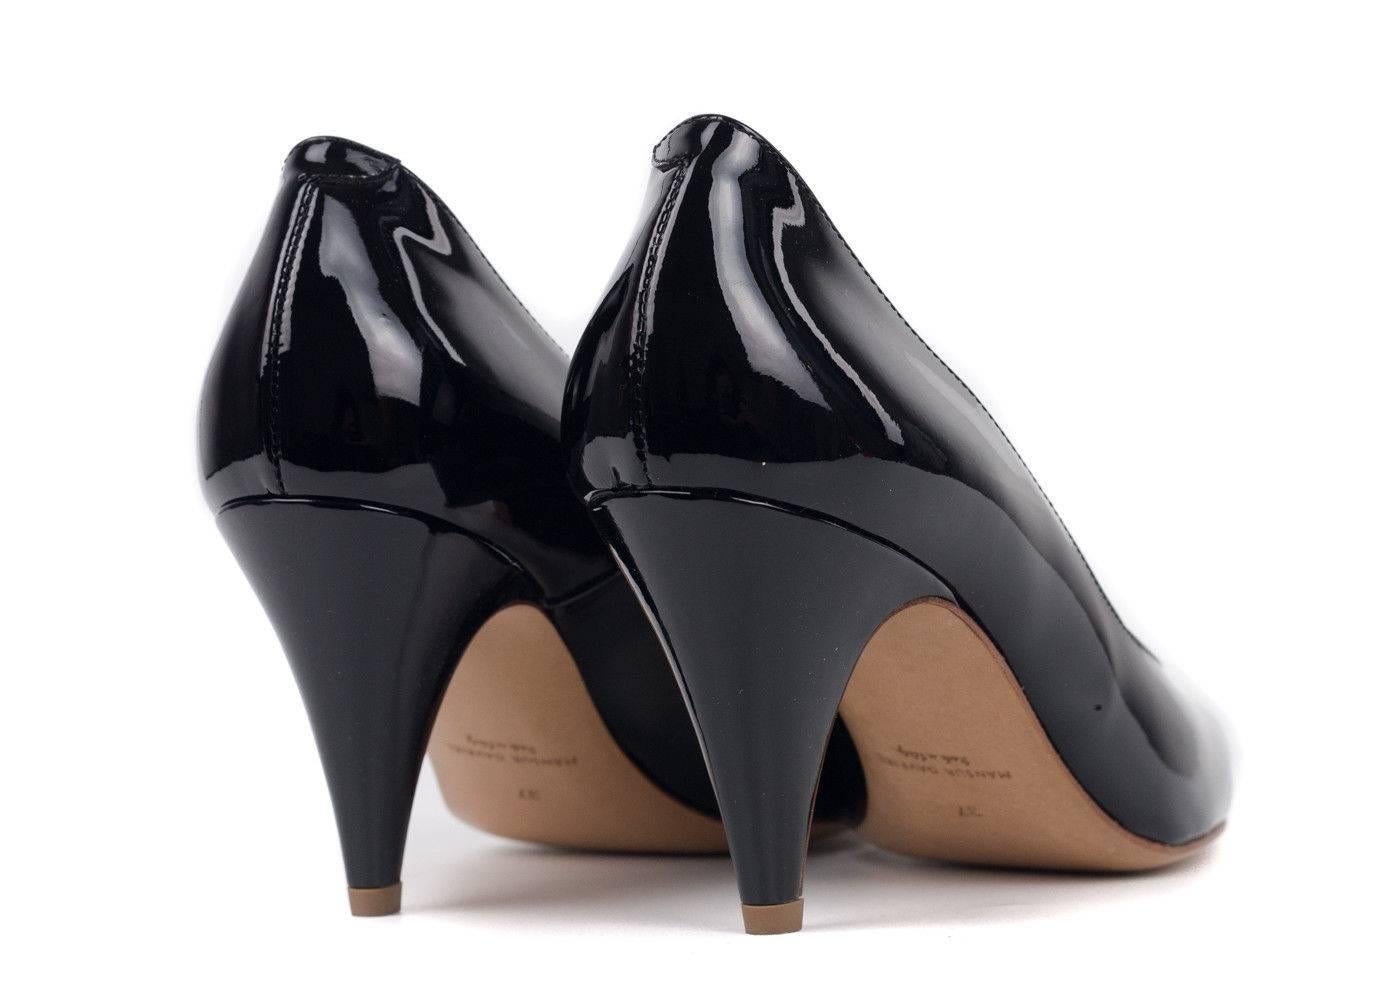 Every women needs a classic pair of black pumps. These Mansur Gavriel black heels are the perfect pair of black beauties to have and wear for years. Perfect for business wear and professional wear, pair yours with all black dress pants and white